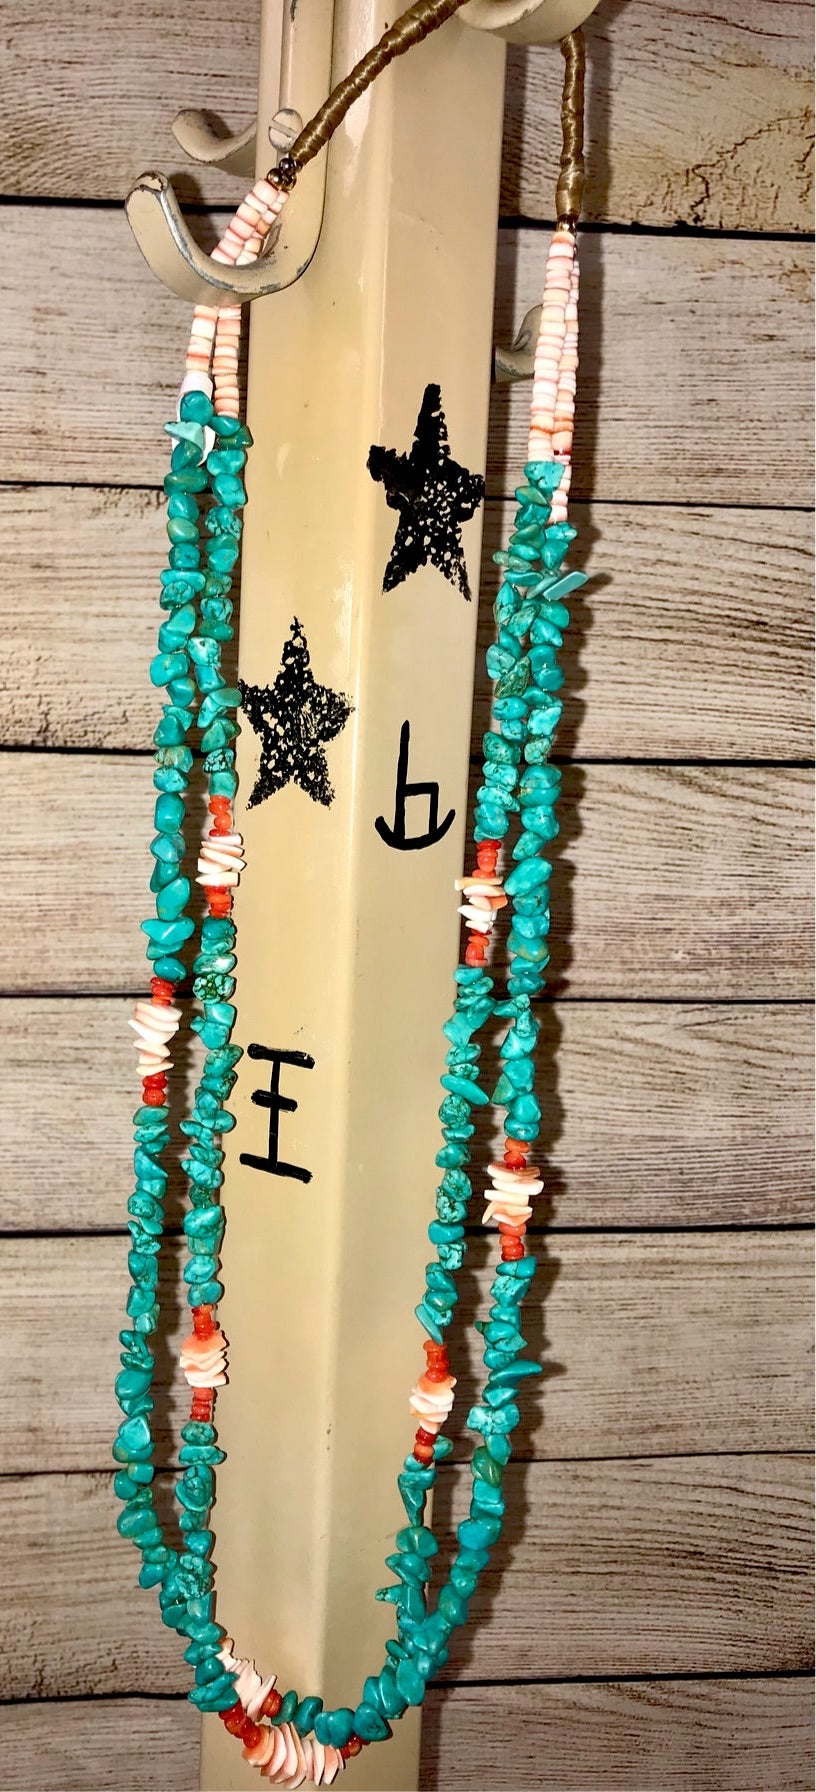 Native American Made 2 Strand Turquoise, Coral, Spiny Oyster Necklace This handmade necklace is a absolute beauty. A stunning Native made two-strand turquoise, coral, and spiny oyster necklace. Layer it or wear it alone or add a pendant to keep your look totally unique. The perfect dainty layering piece! Simple, yet striking!   Size: 29" Inches Length   Stone: Turquoise, Coral. and Spiny Oyster